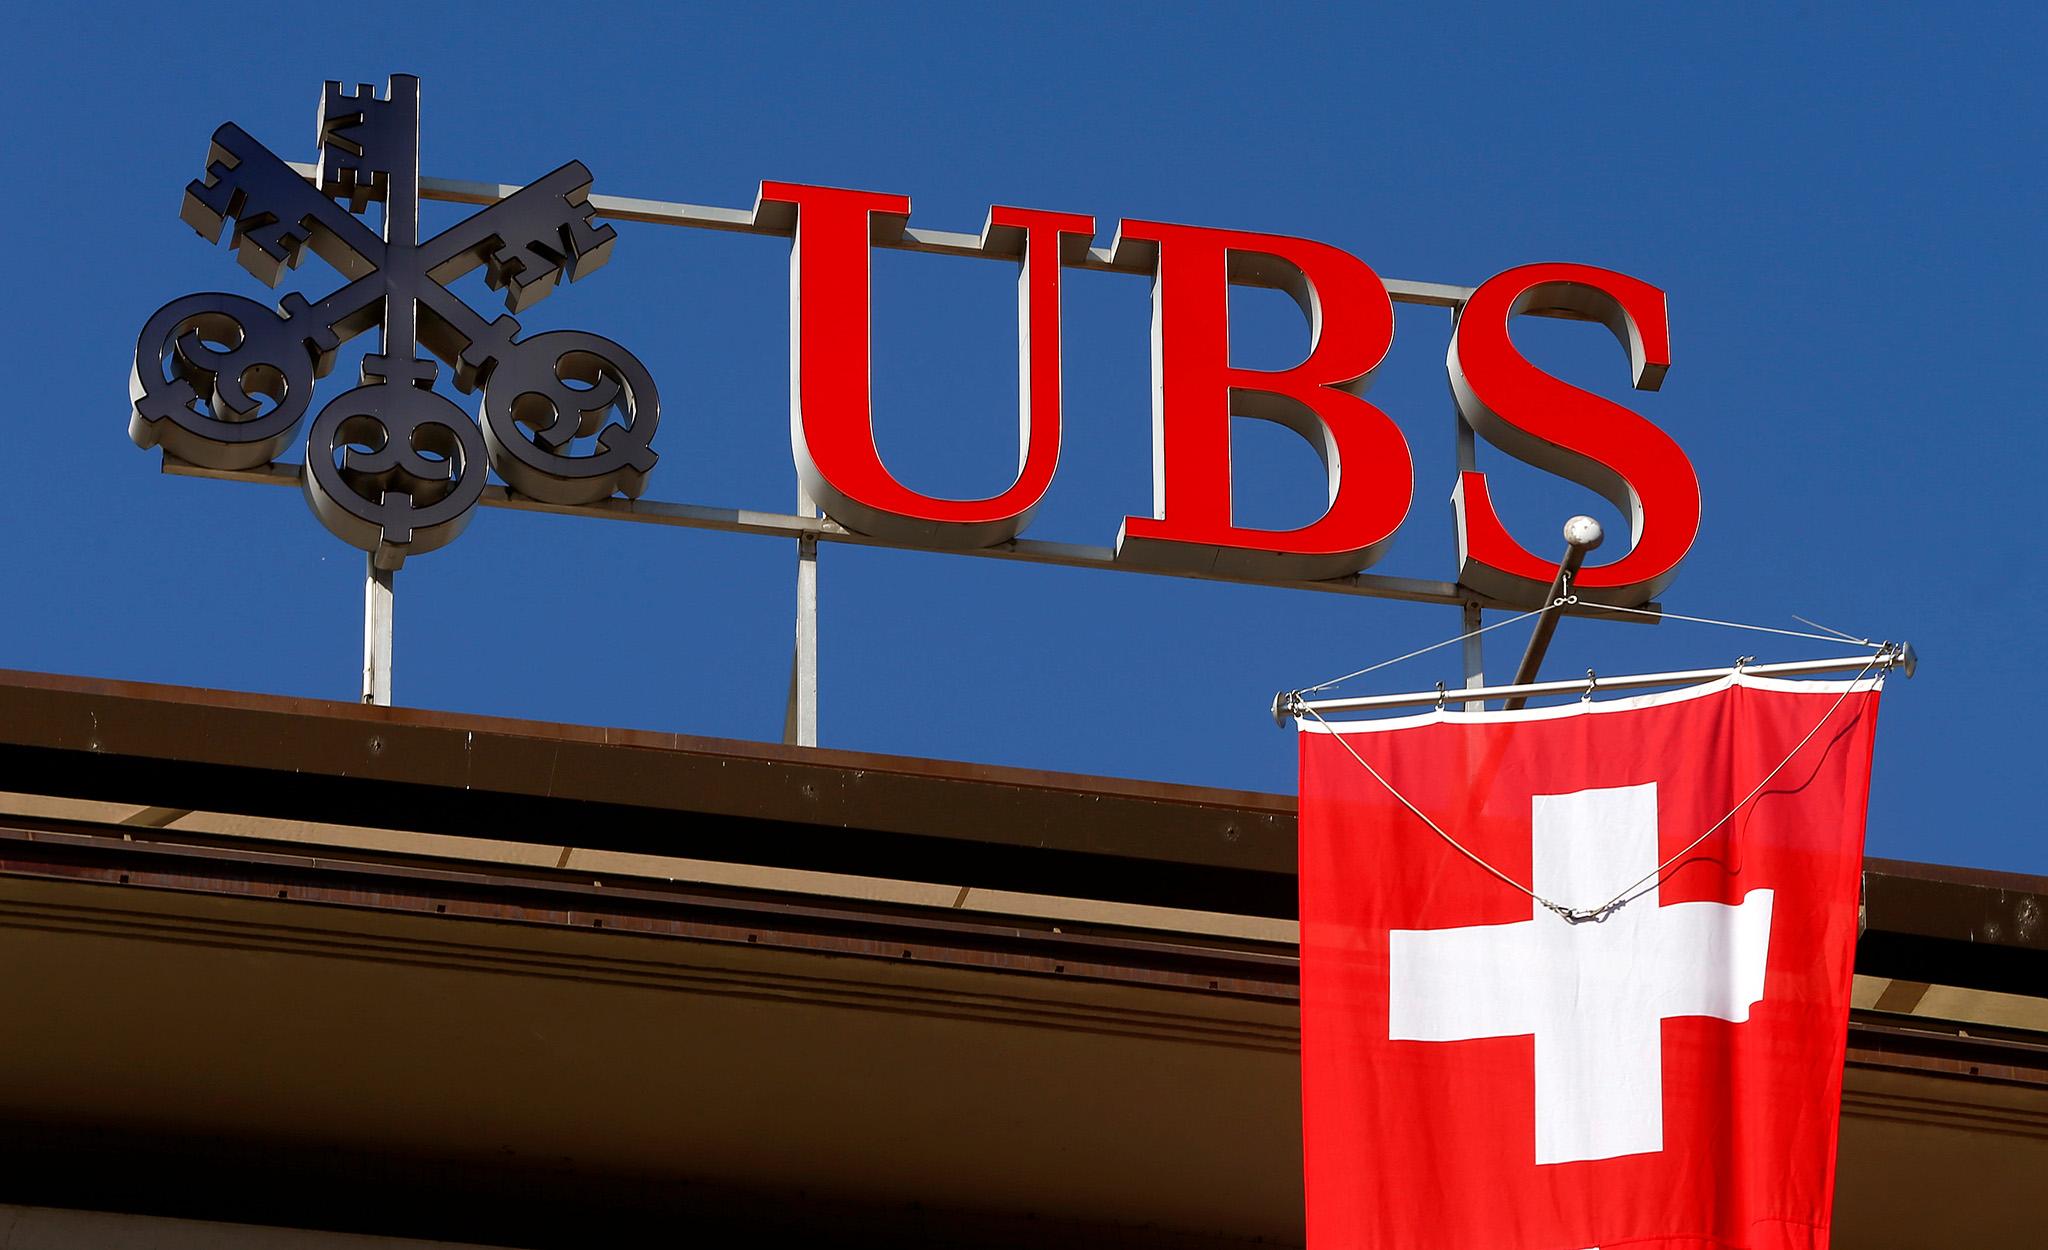 UBs is leading a six-strong group looking for digital equivalents of major currencies